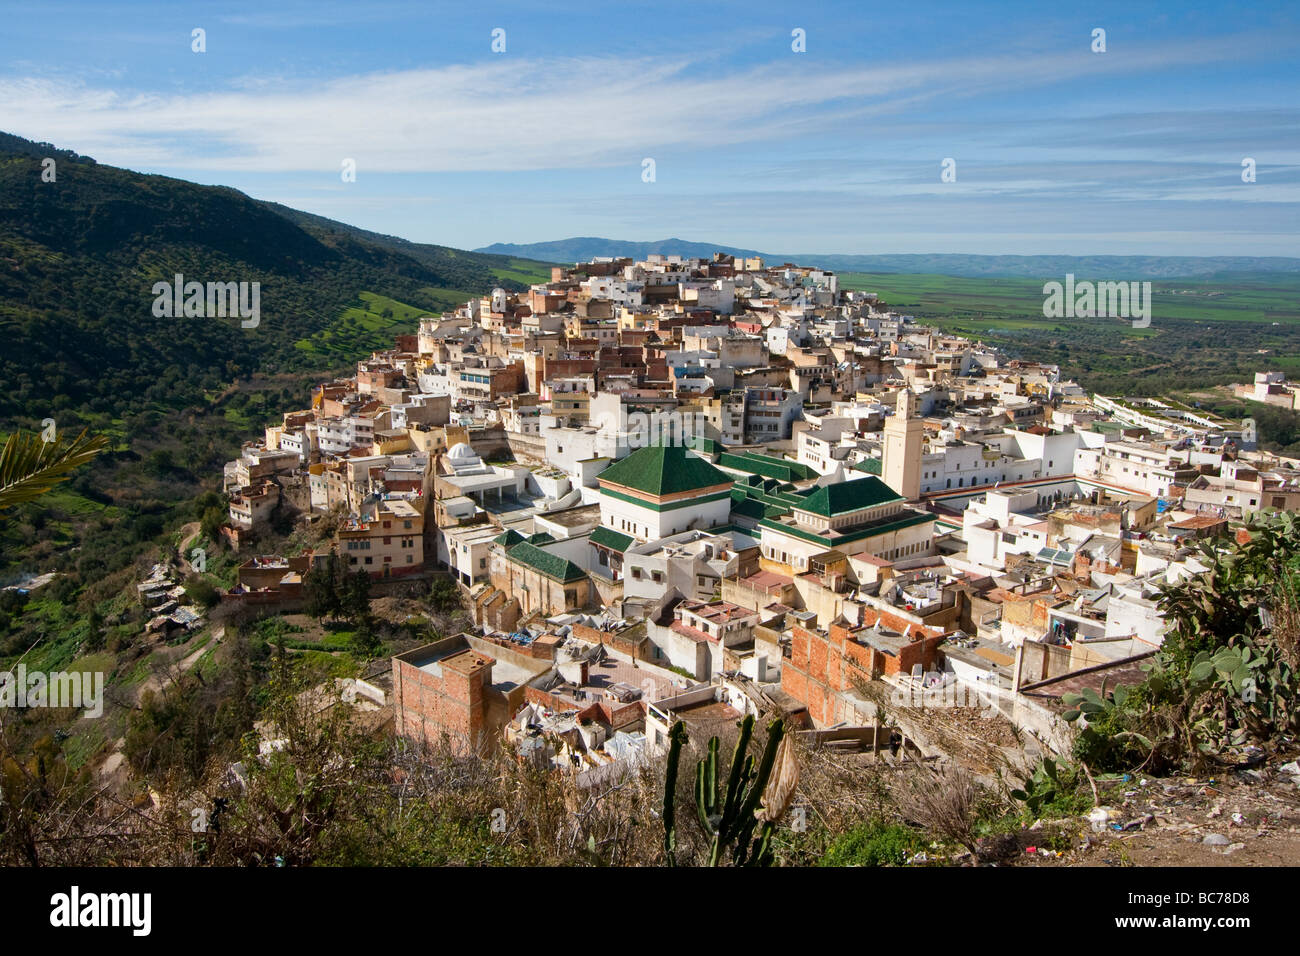 Village of Moulay Idriss or Zerhoun in Morocco Stock Photo